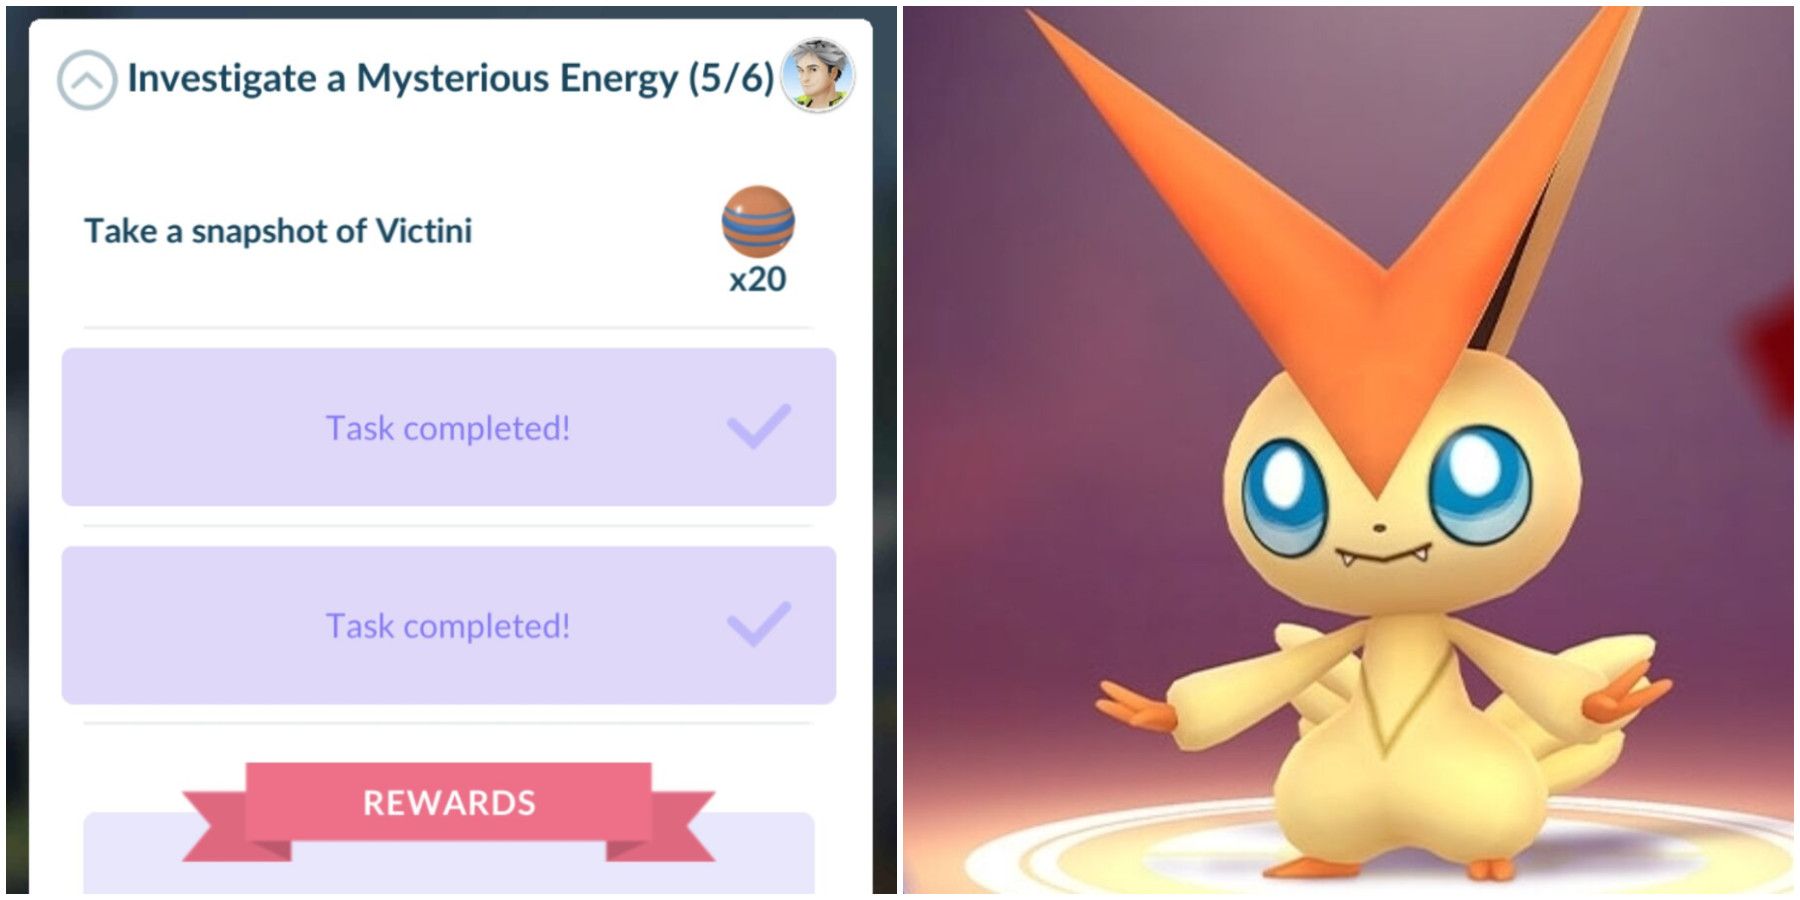 Pokémon GO Changes Genesect Quests So They Can All Be Done Alone